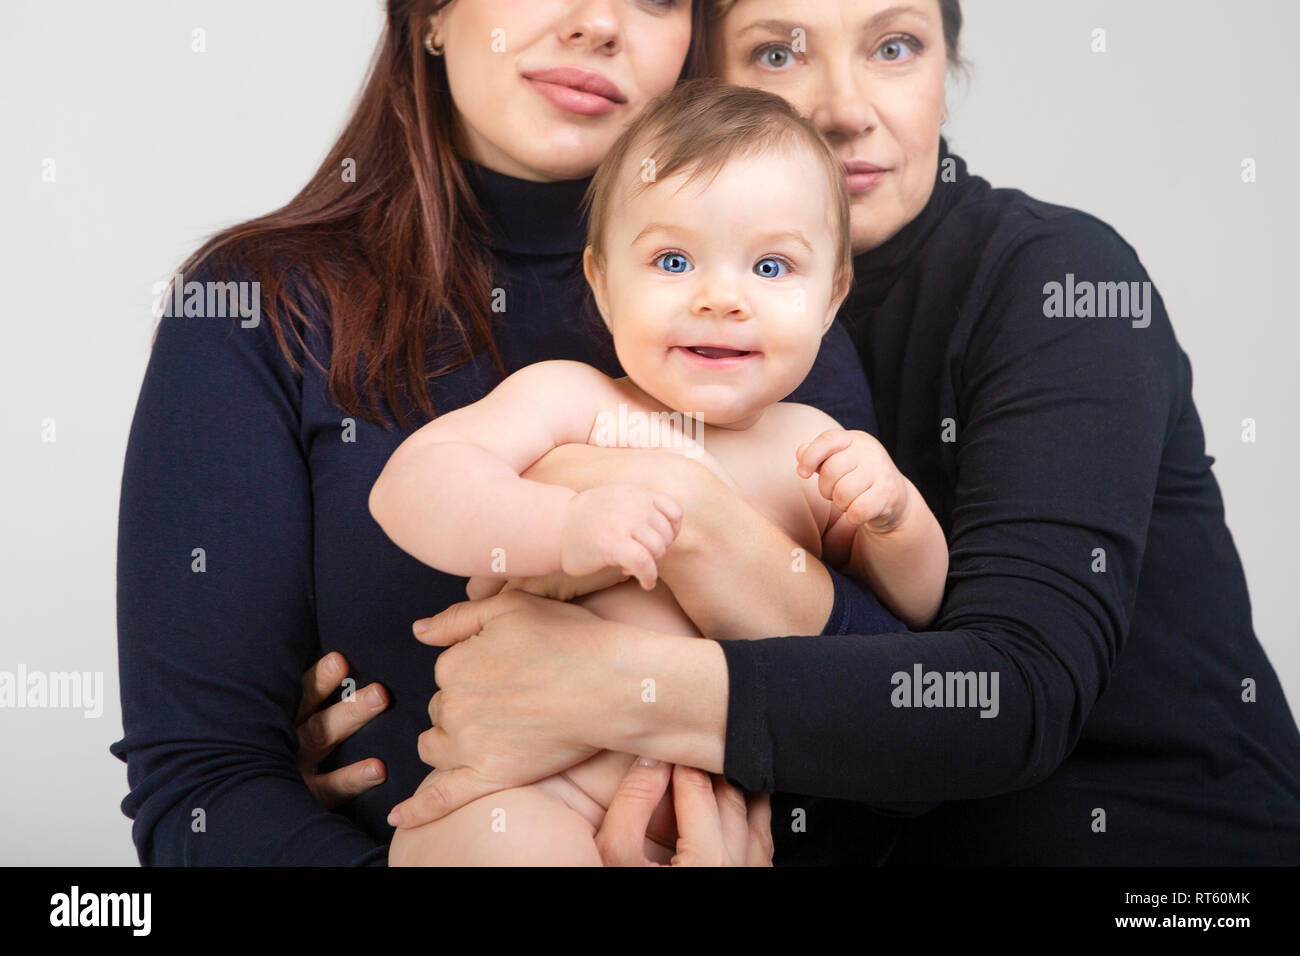 Grandmother, daughter and granddaughter on white portrait, happy family concept. Close up on the baby Stock Photo